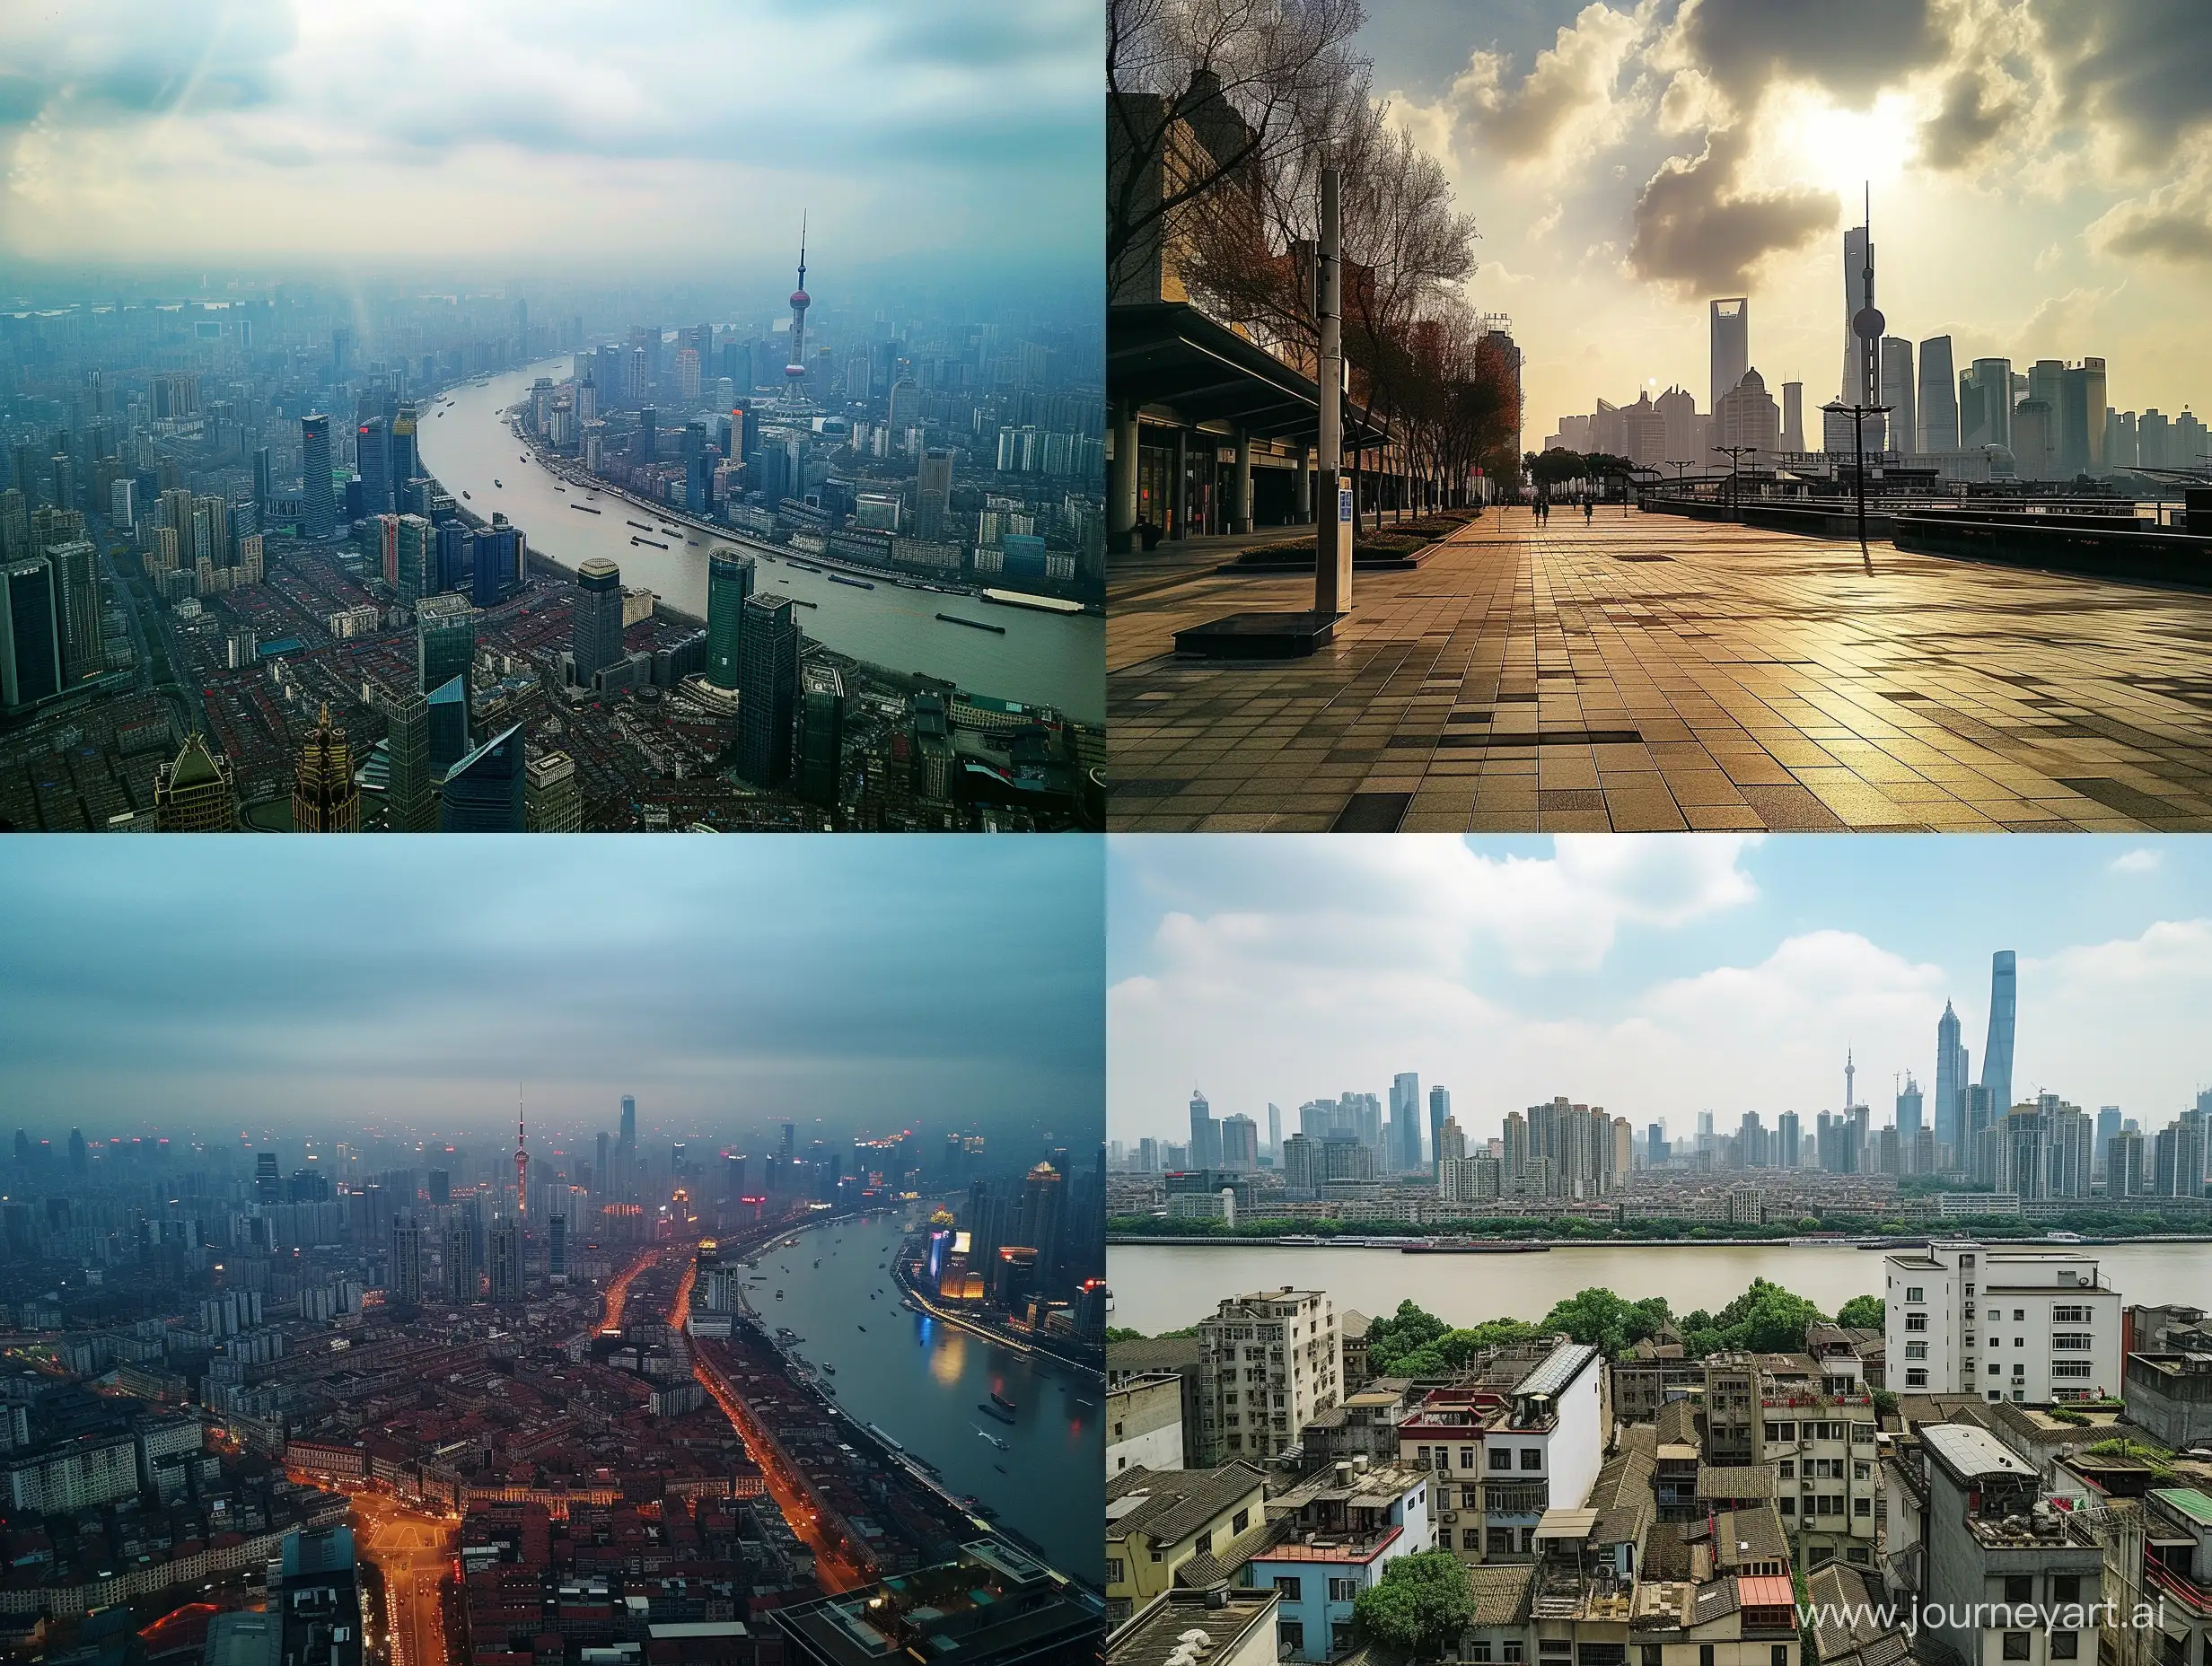 a phone photo of a shanghai city, photography, style raw, environment, wide view,

